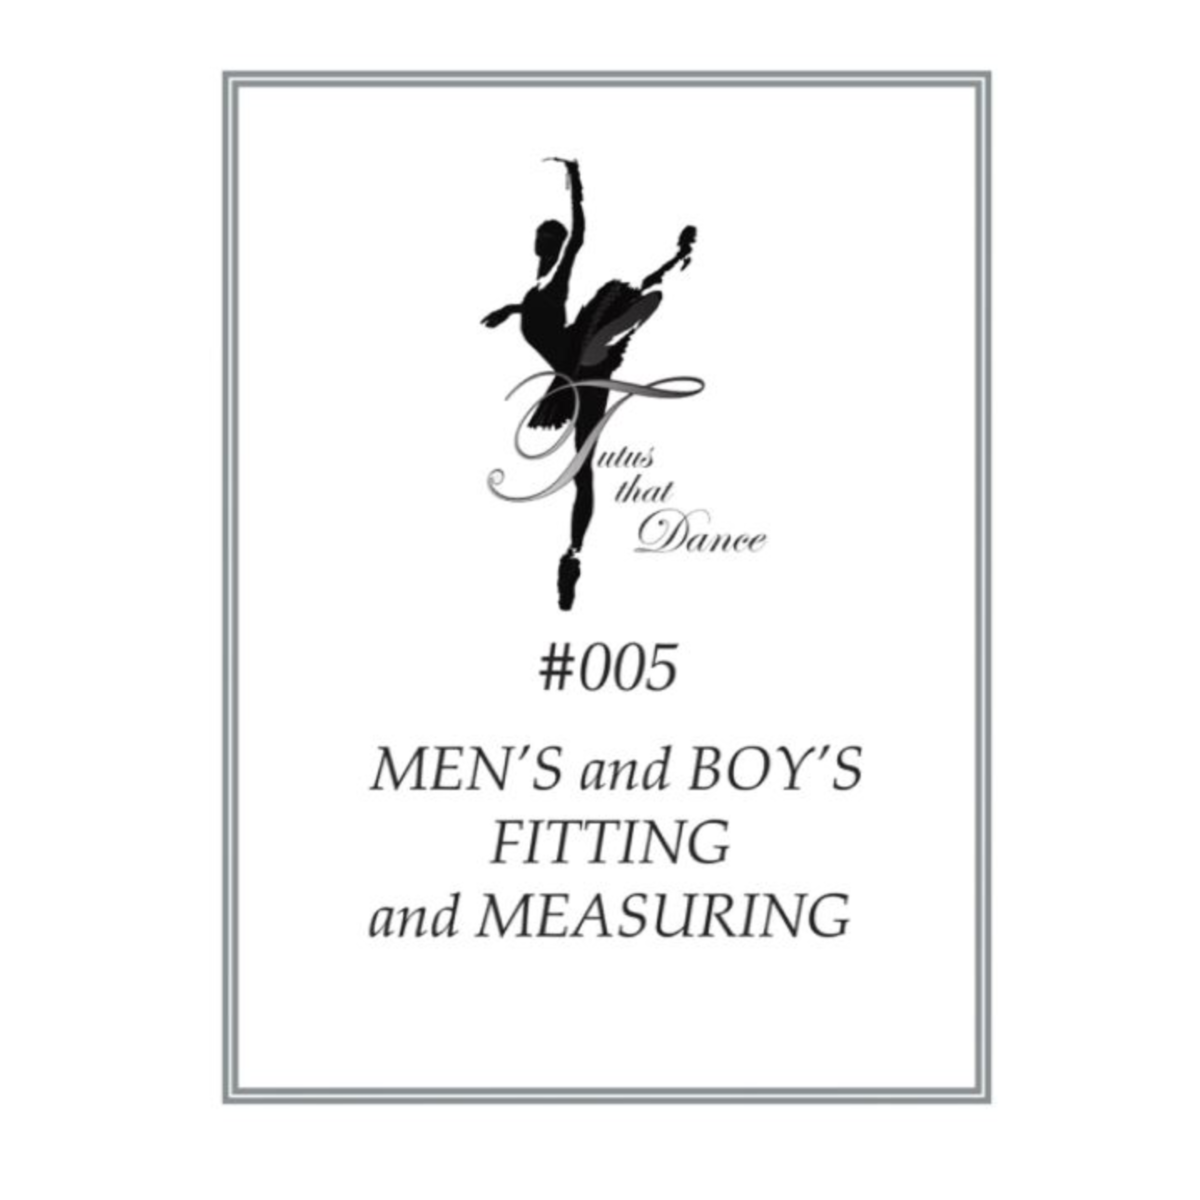 Men's Fitting & Measuring Instructions by Tutus That Dance